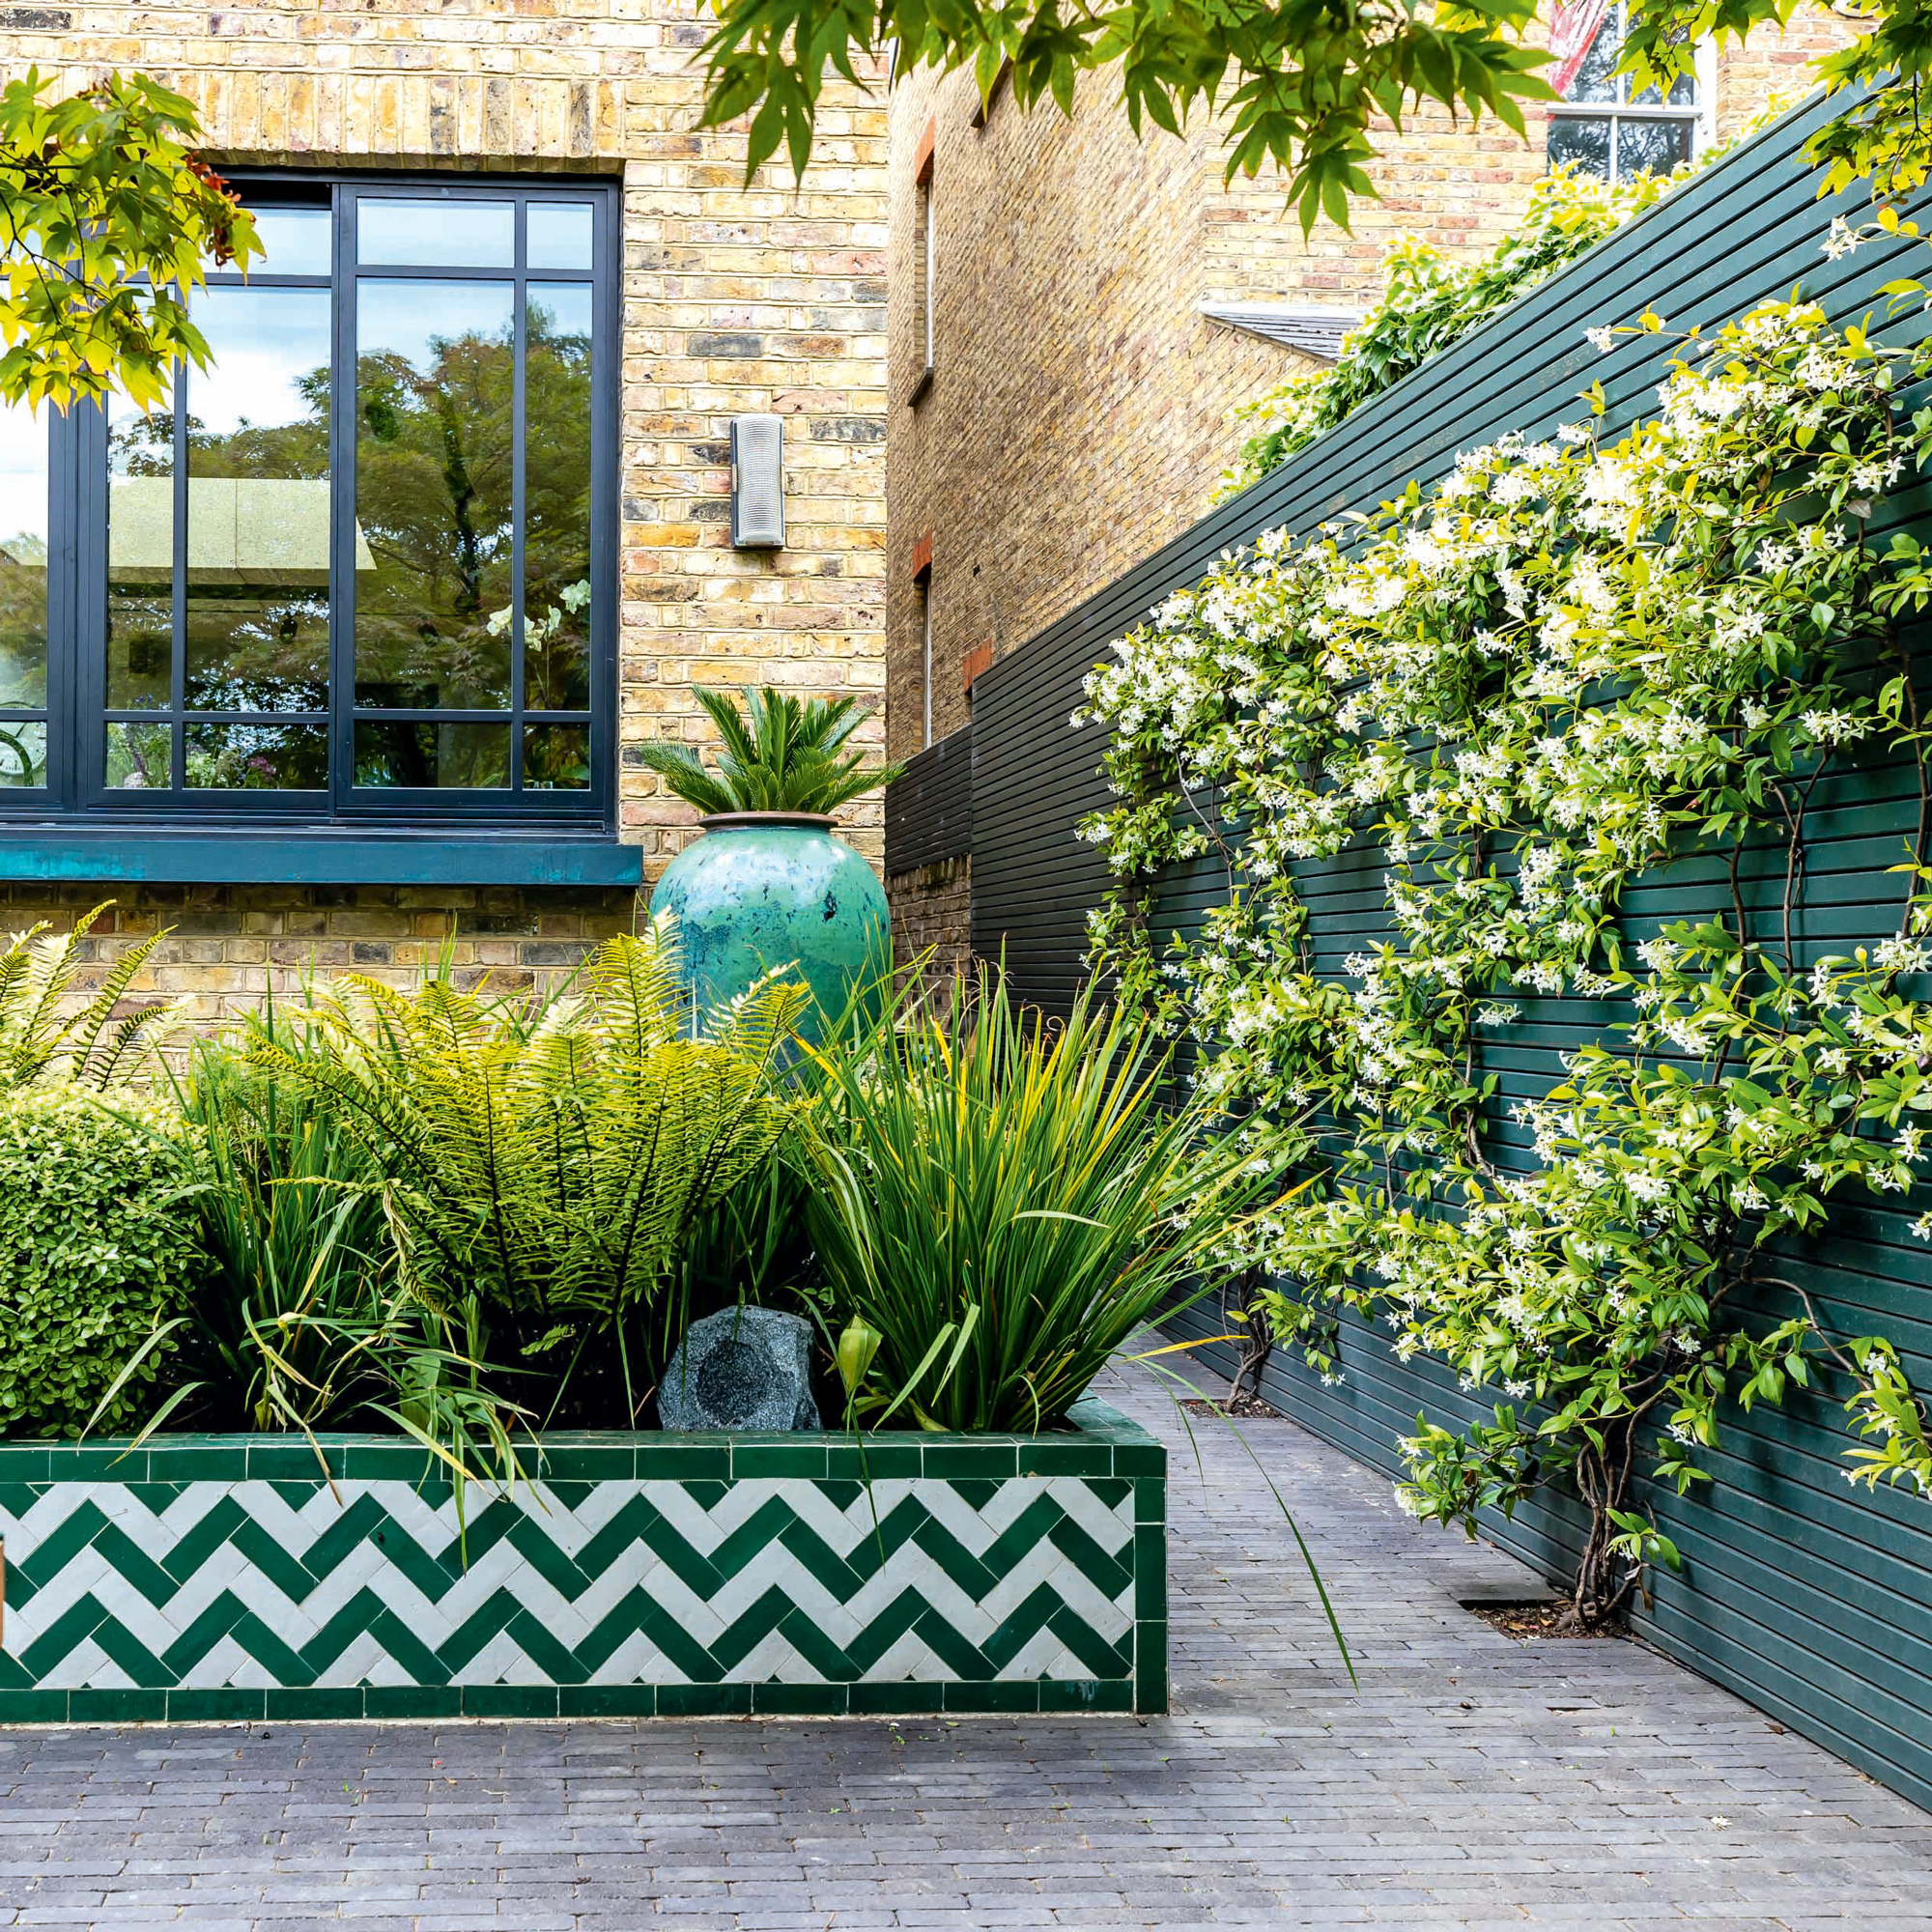 garden makeover with green fencing and patterned tiles